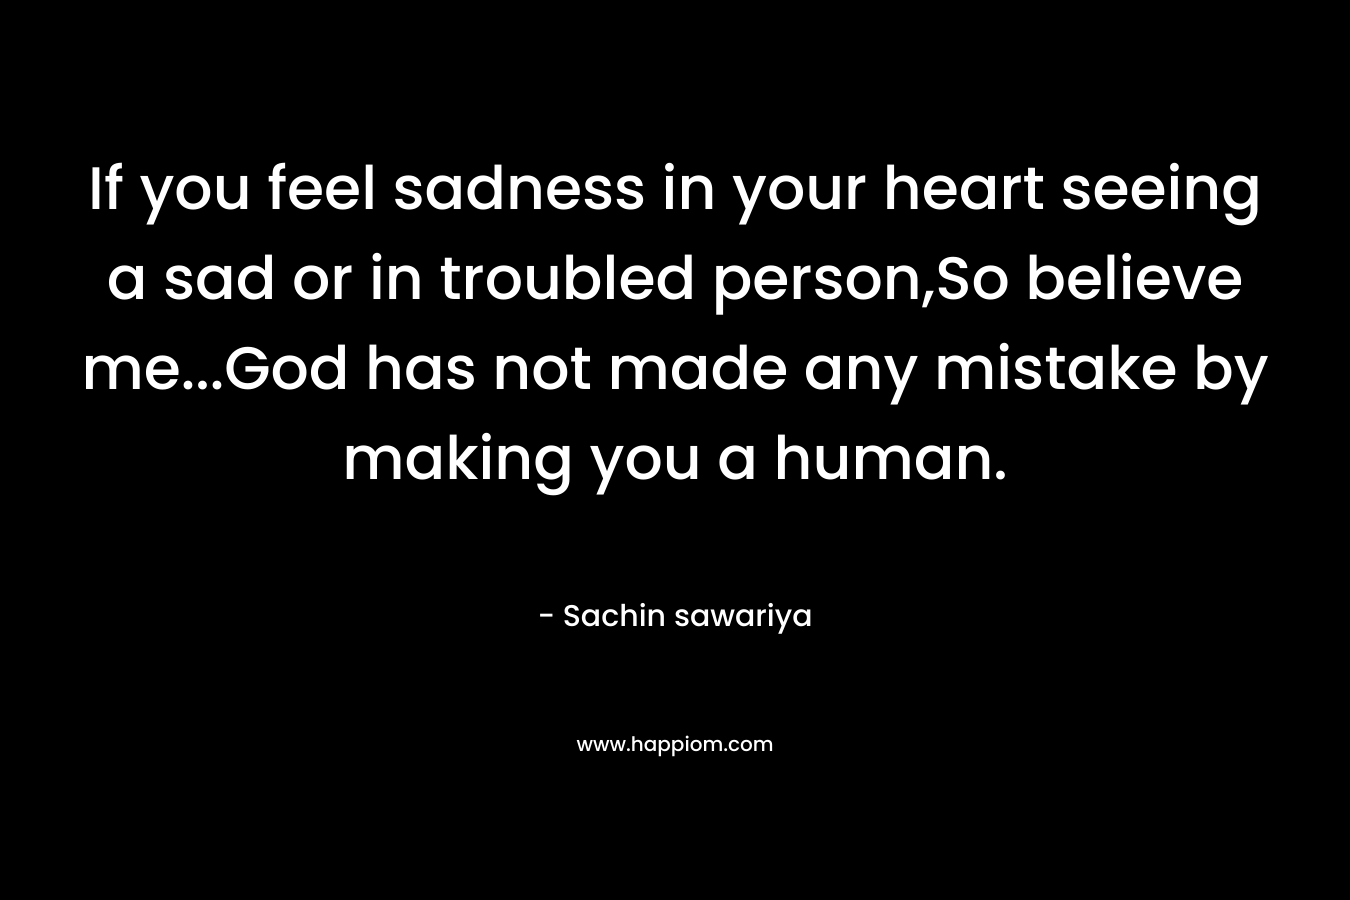 If you feel sadness in your heart seeing a sad or in troubled person,So believe me...God has not made any mistake by making you a human.